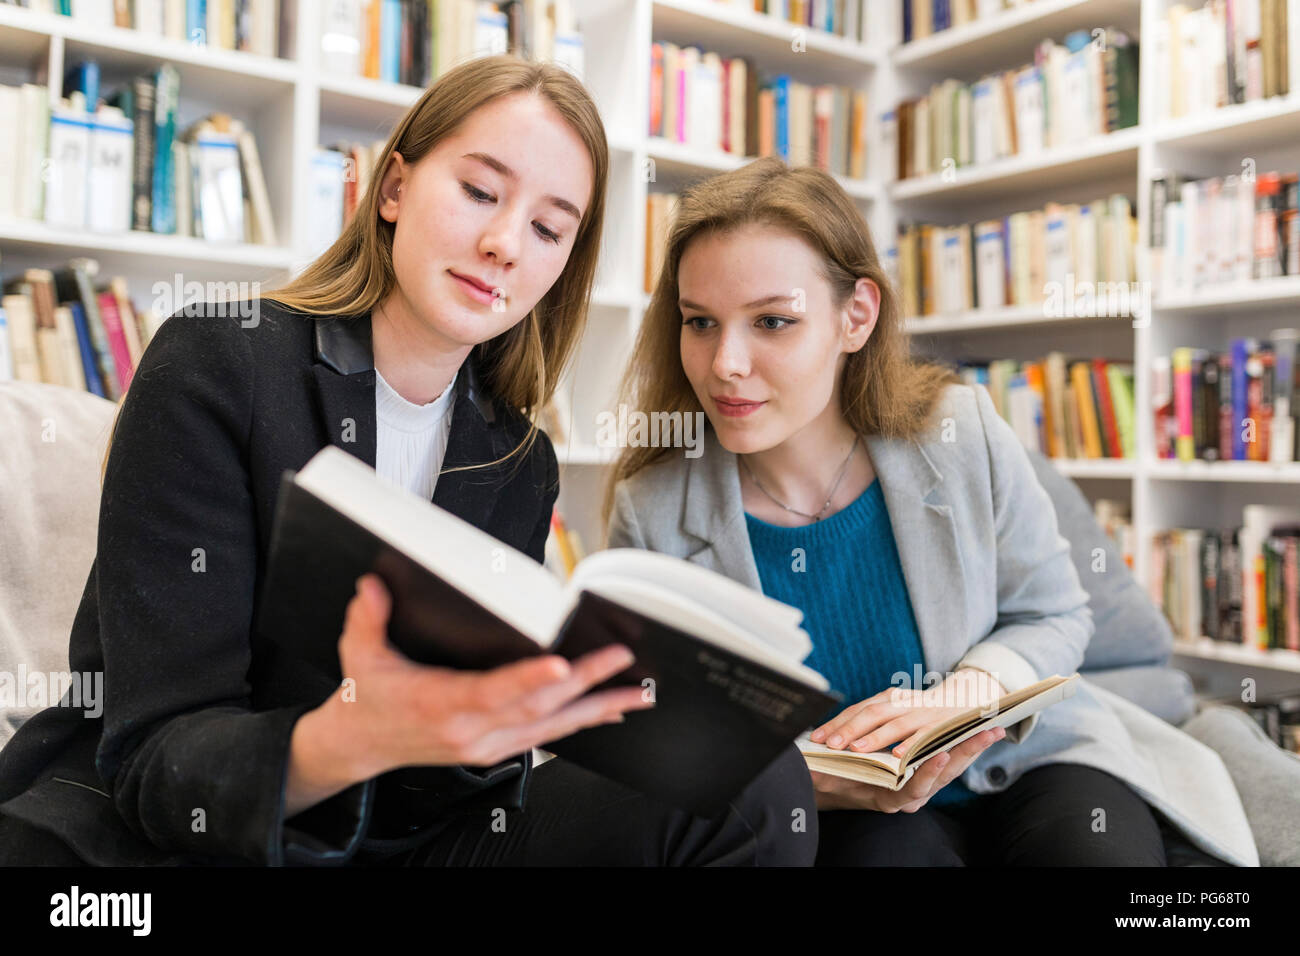 Portrait of two teenage girls sitting  in a public library looking at a book Stock Photo